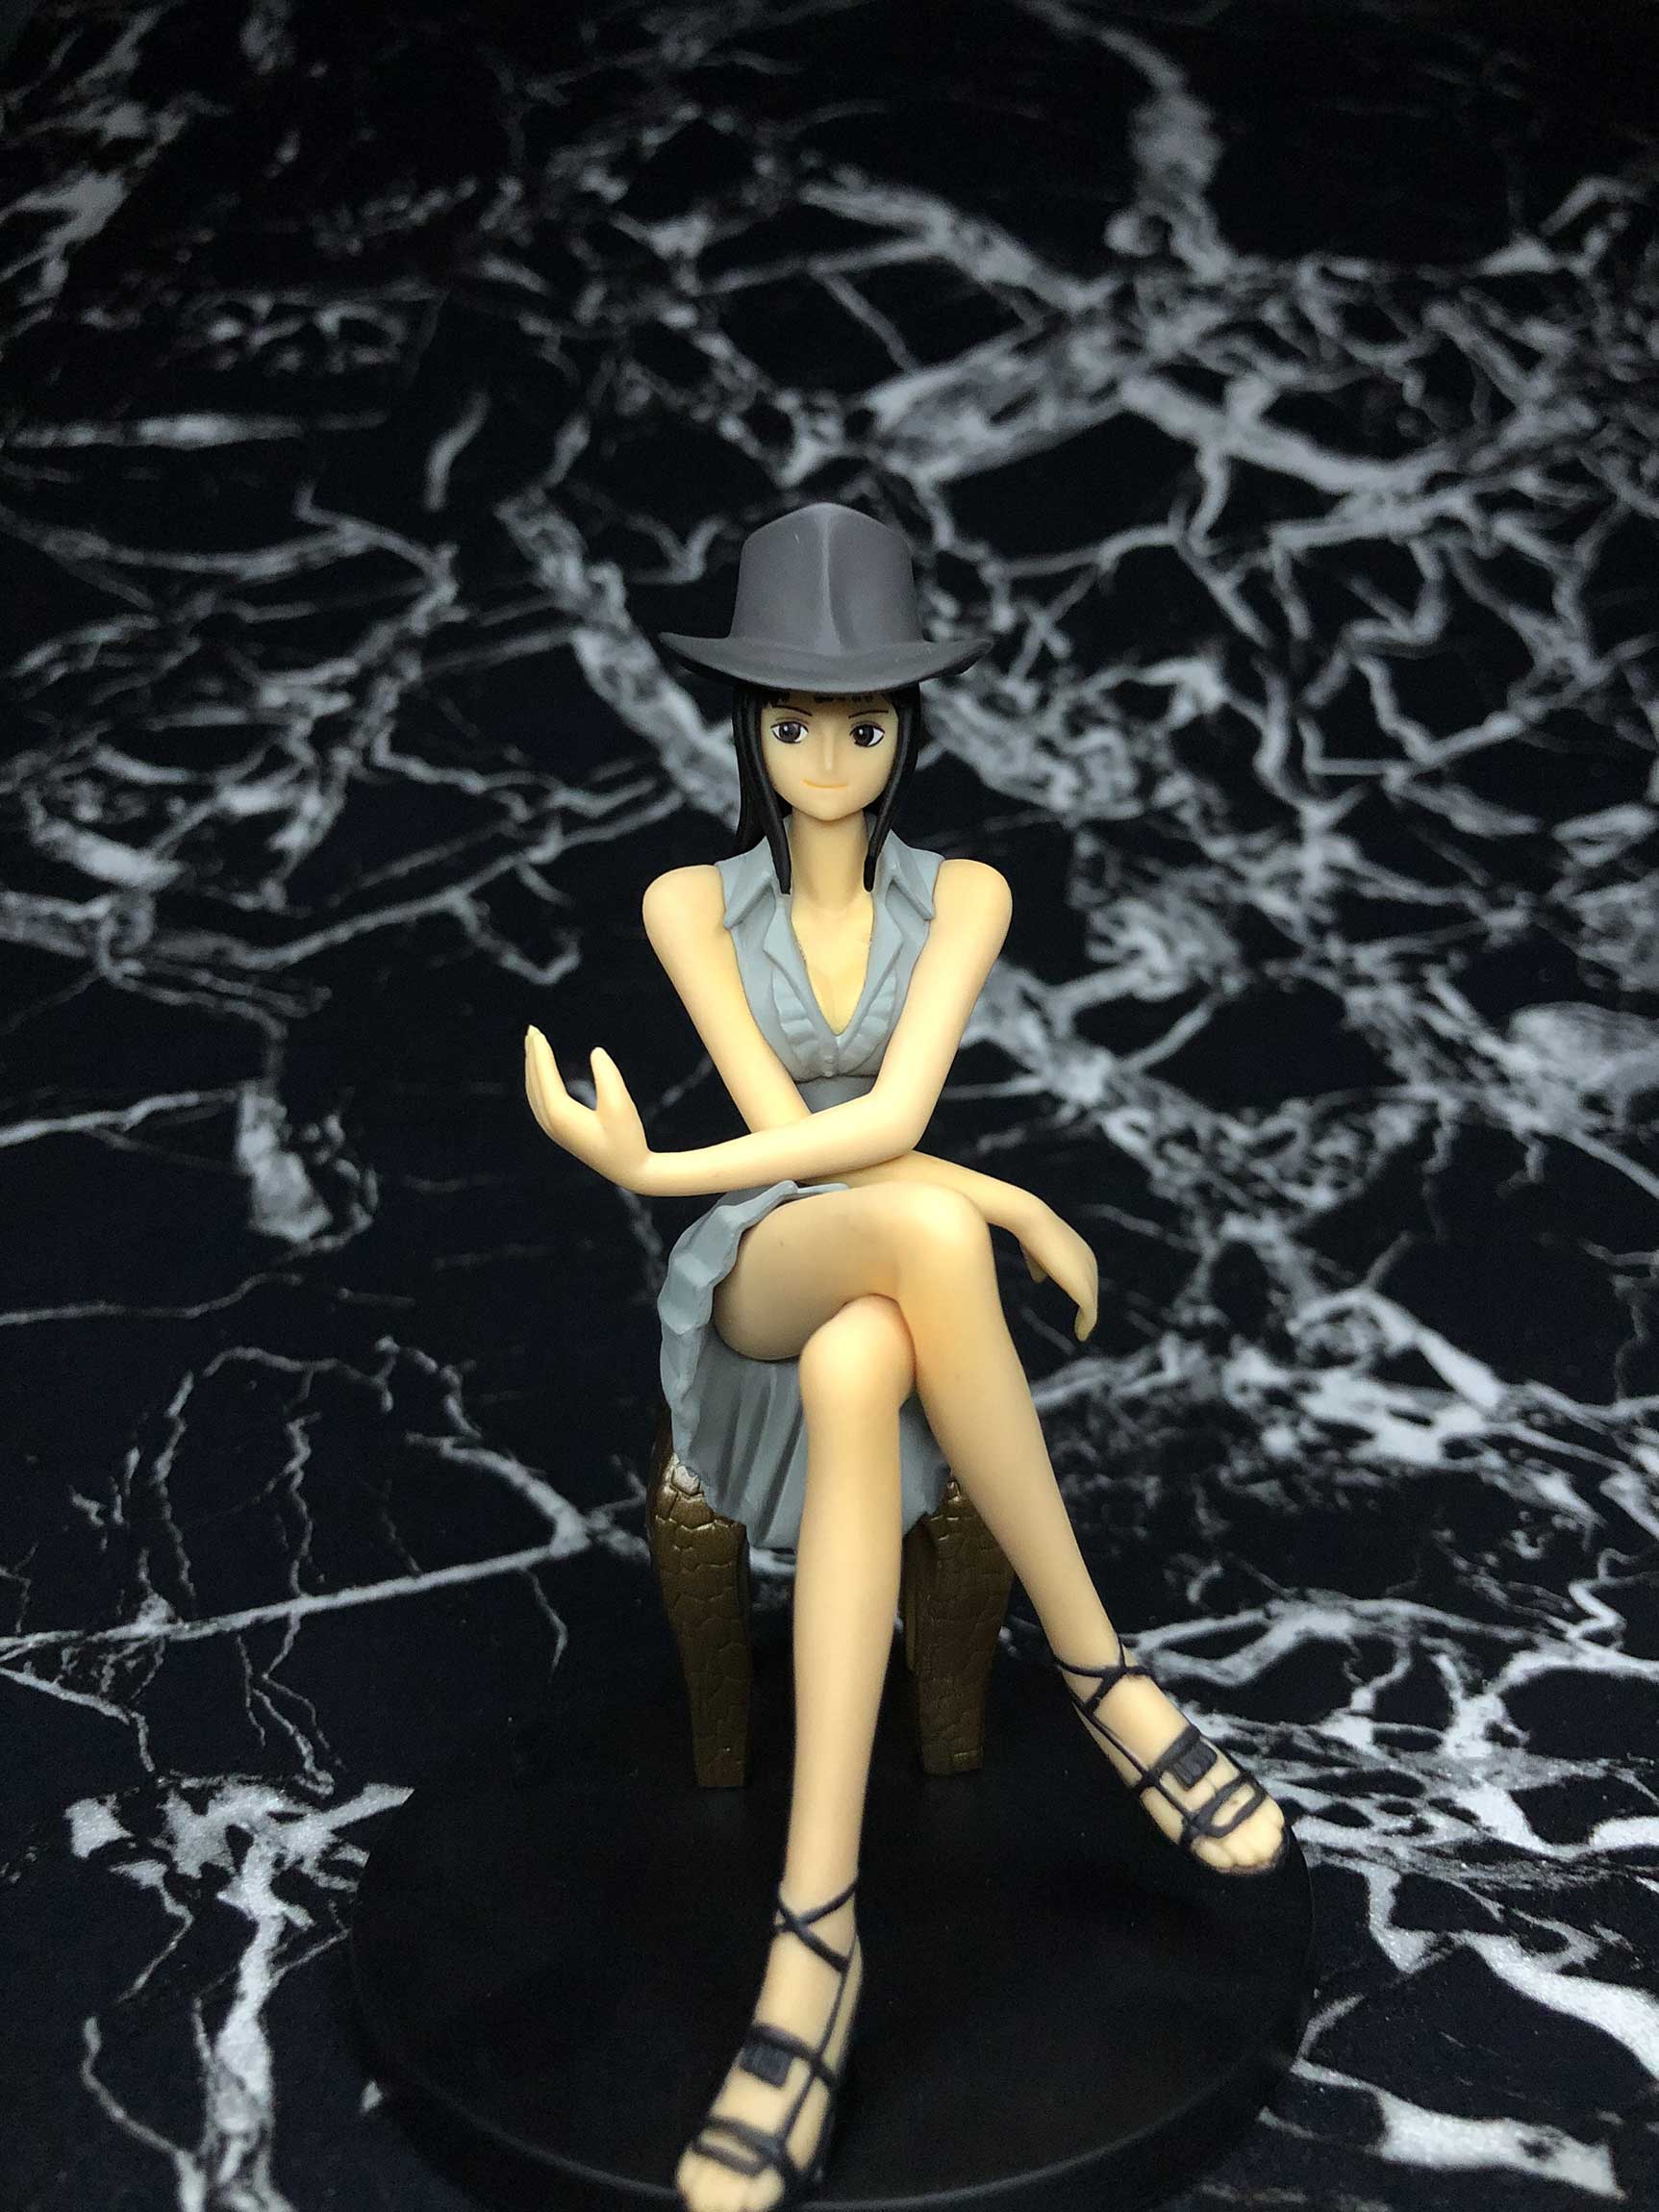 Nico Robin Super Styling Suit & Dress BANDAI | One Piece by Admin at TeamCitadelHobbies